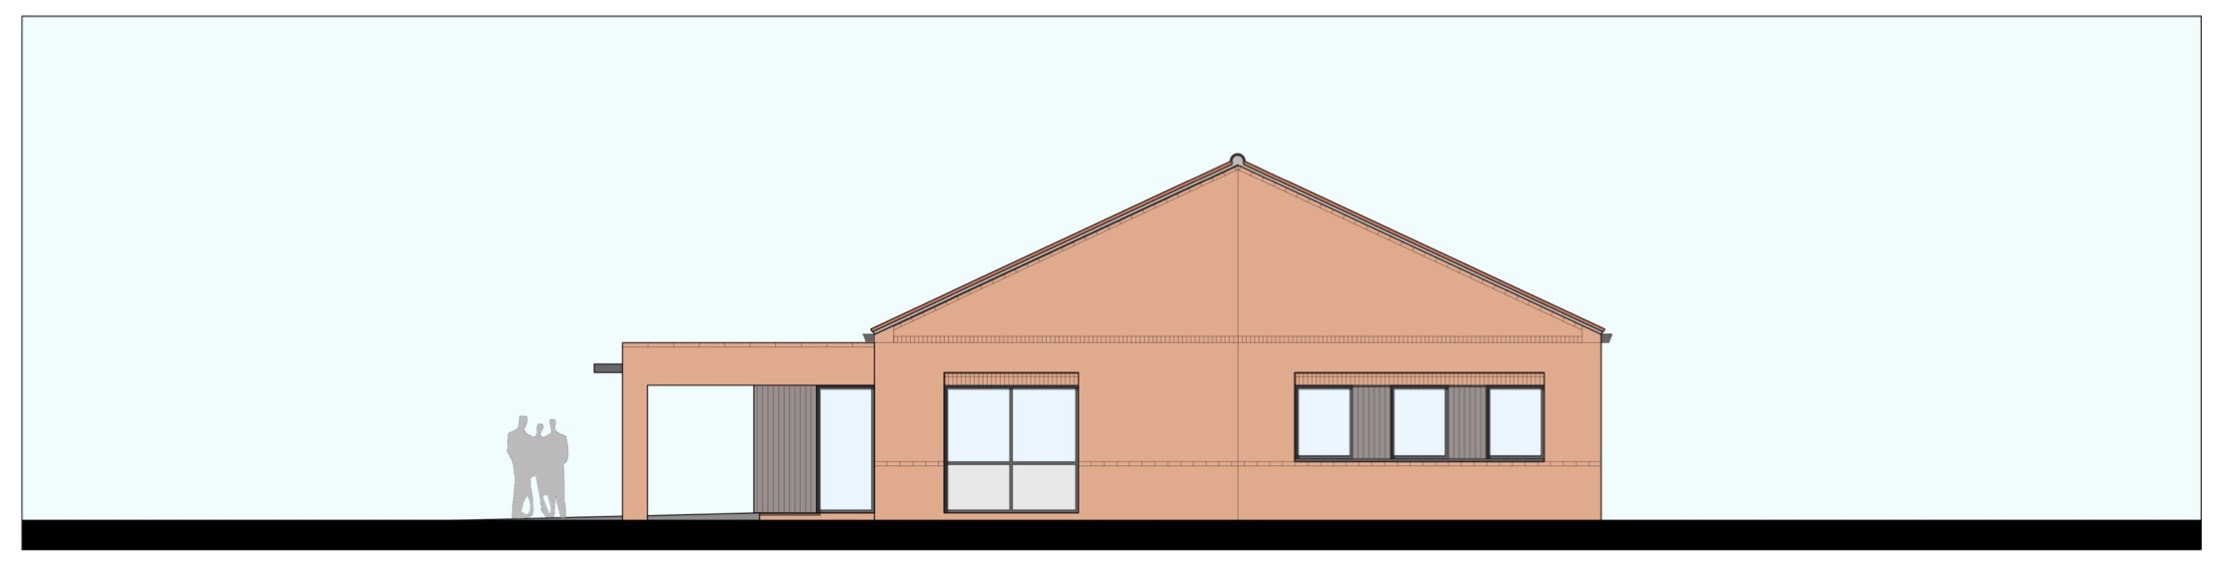 Proposed elevations for the new centre | Image: West Lindsey District Council